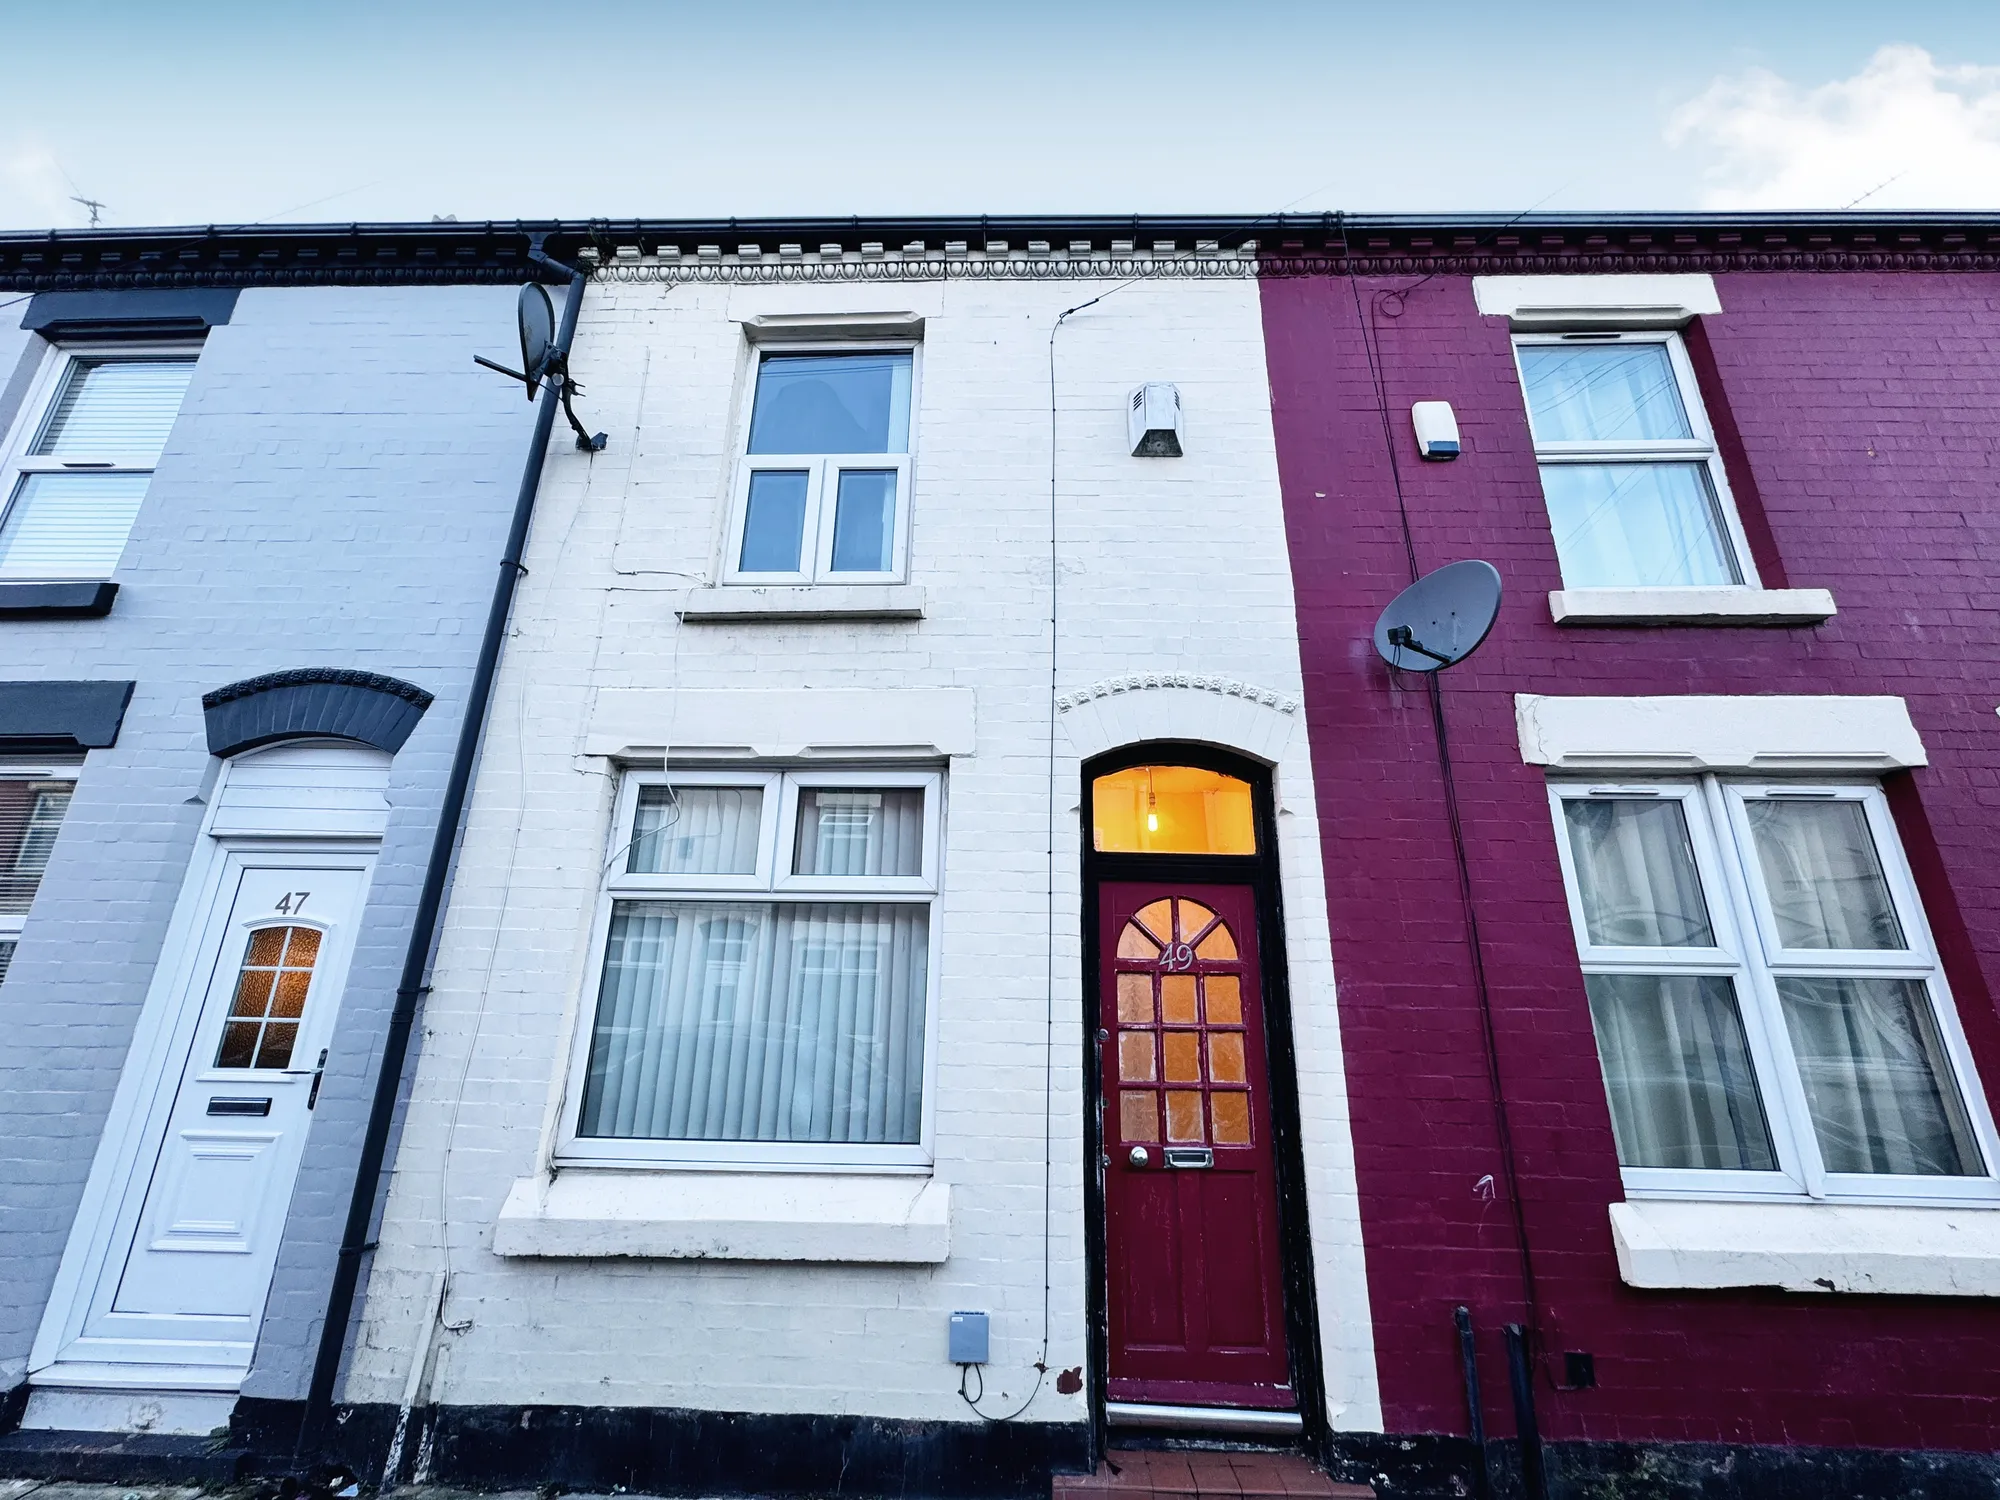 Charming two-bedroom mid-terrace home in lively L6 area of Liverpool. Cosy lounge, connected dining room, well-equipped kitchen, bathroom on ground floor. Two bedrooms upstairs. Gas central heating, double-glazed windows. Conveniently located near amenities in Kensington.